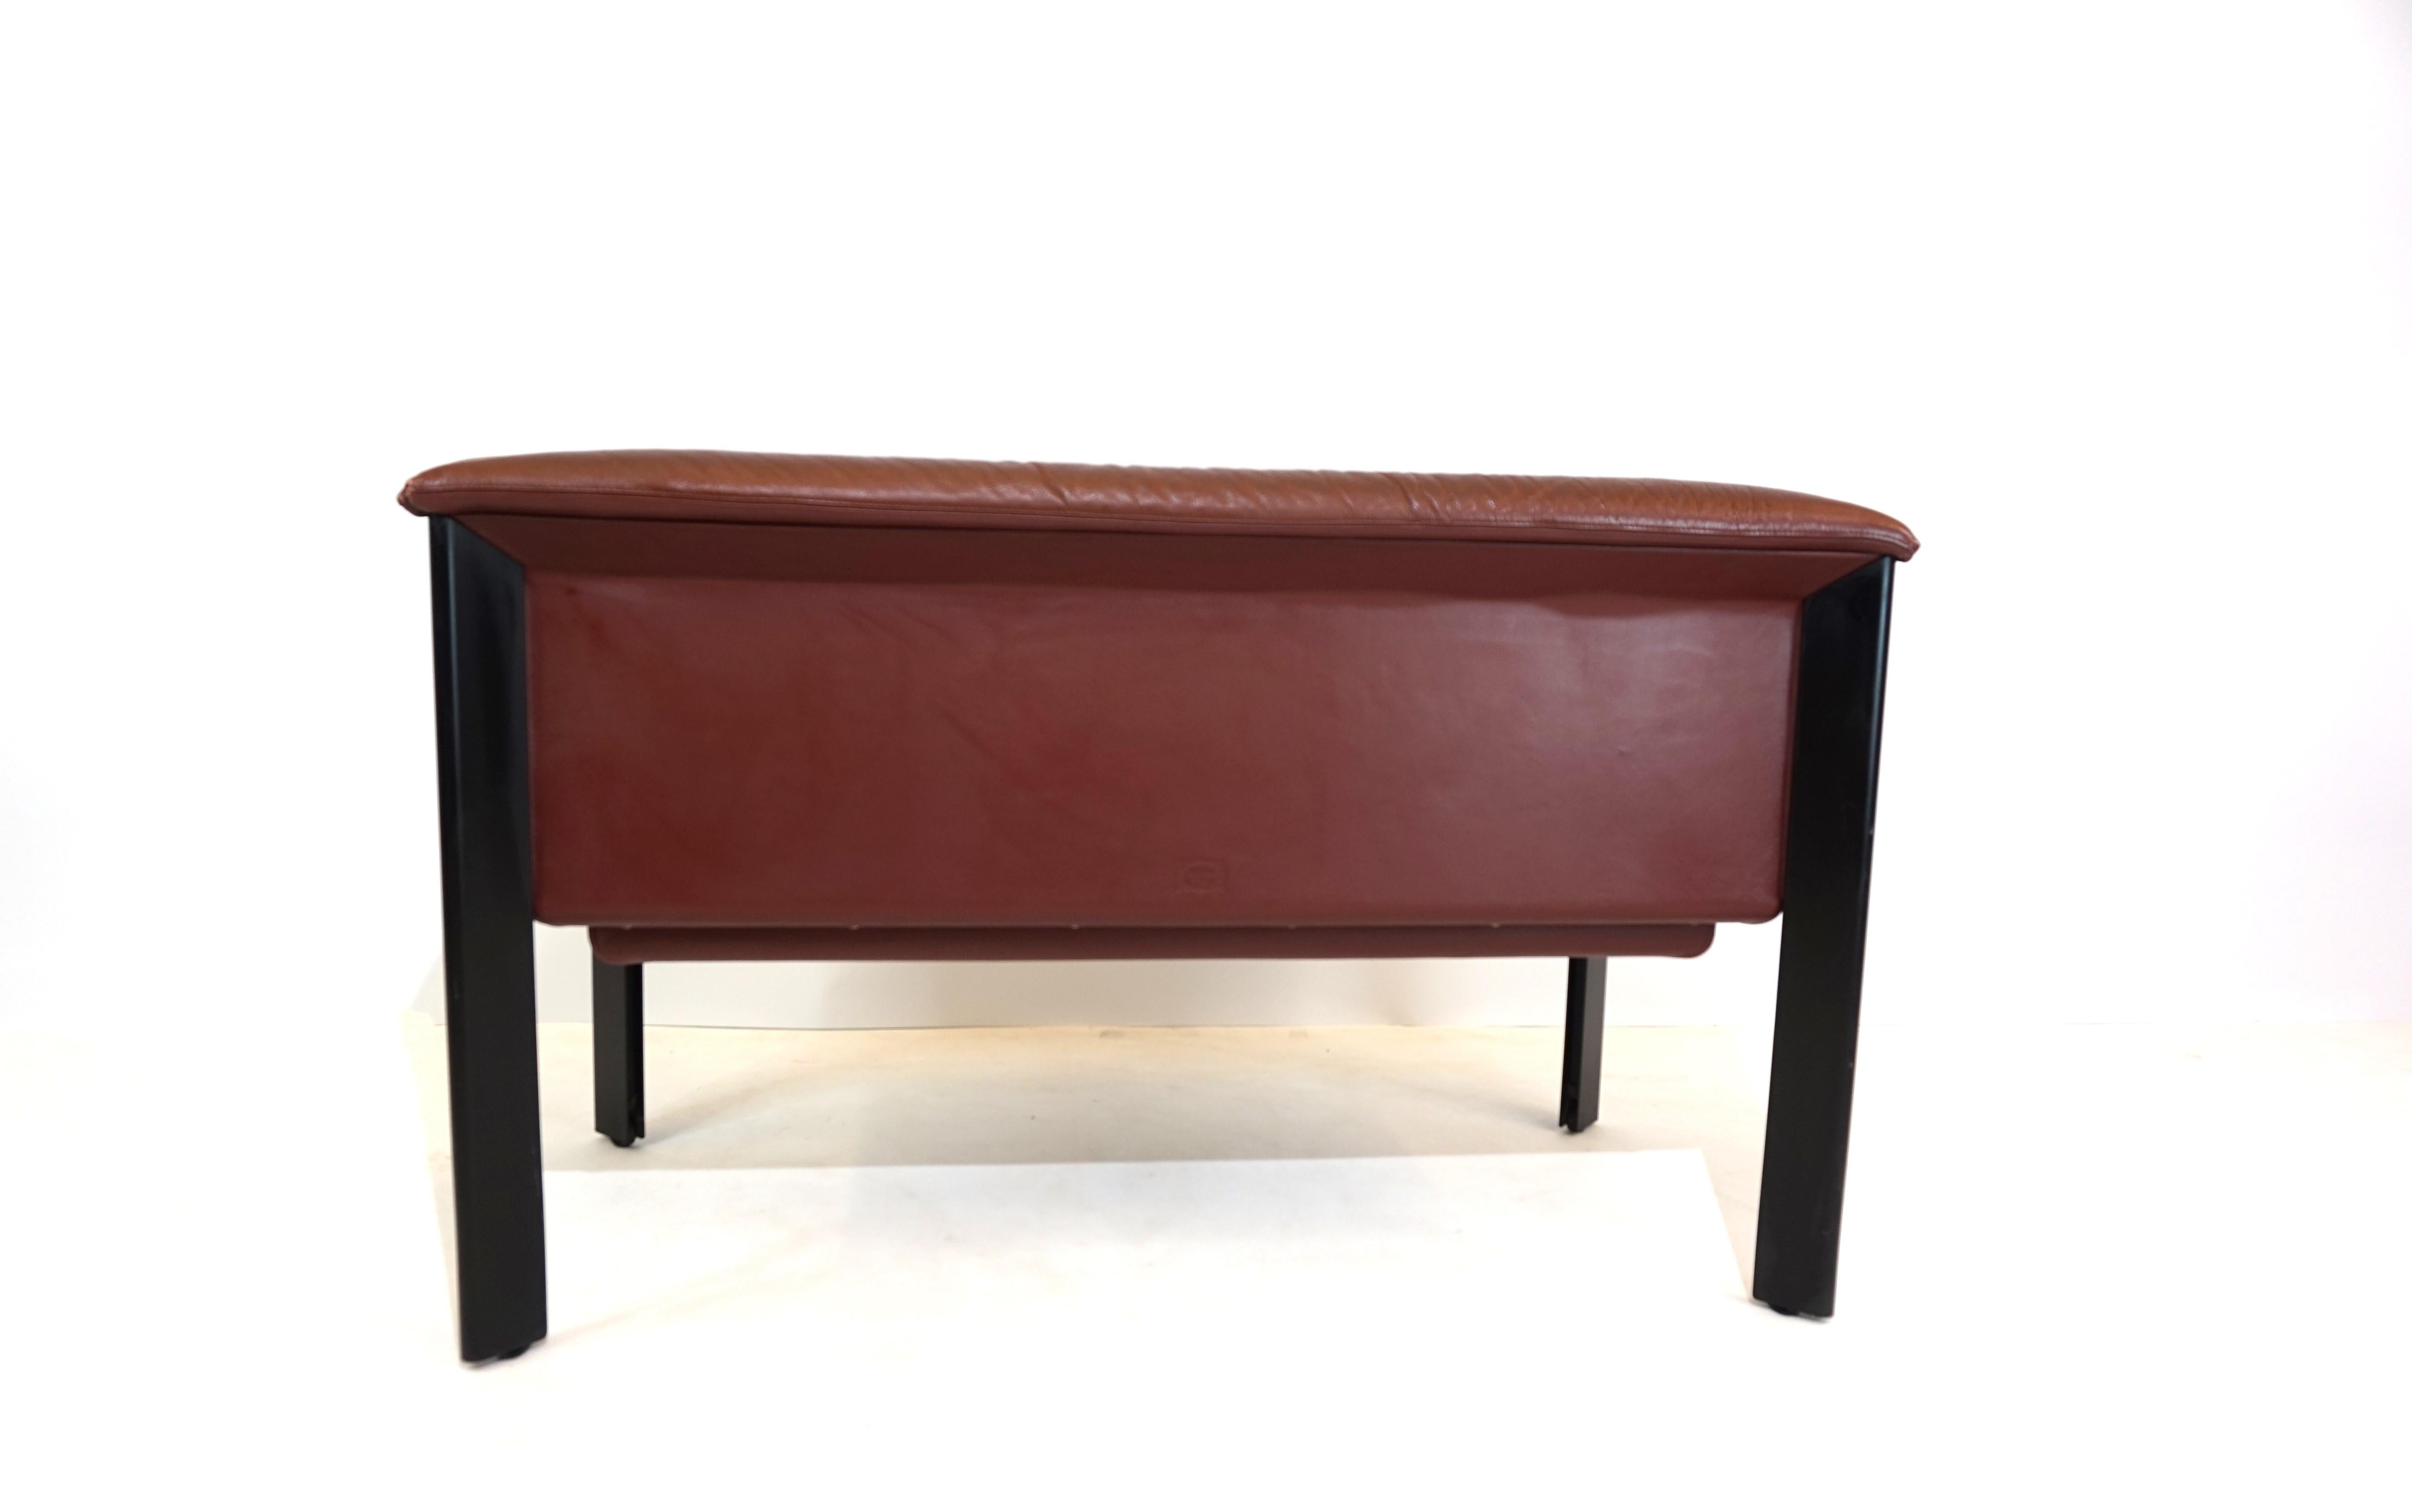 Poltrona Frau Interlude leather bench 2 seater by Marco Zanuso In Good Condition In Ludwigslust, DE